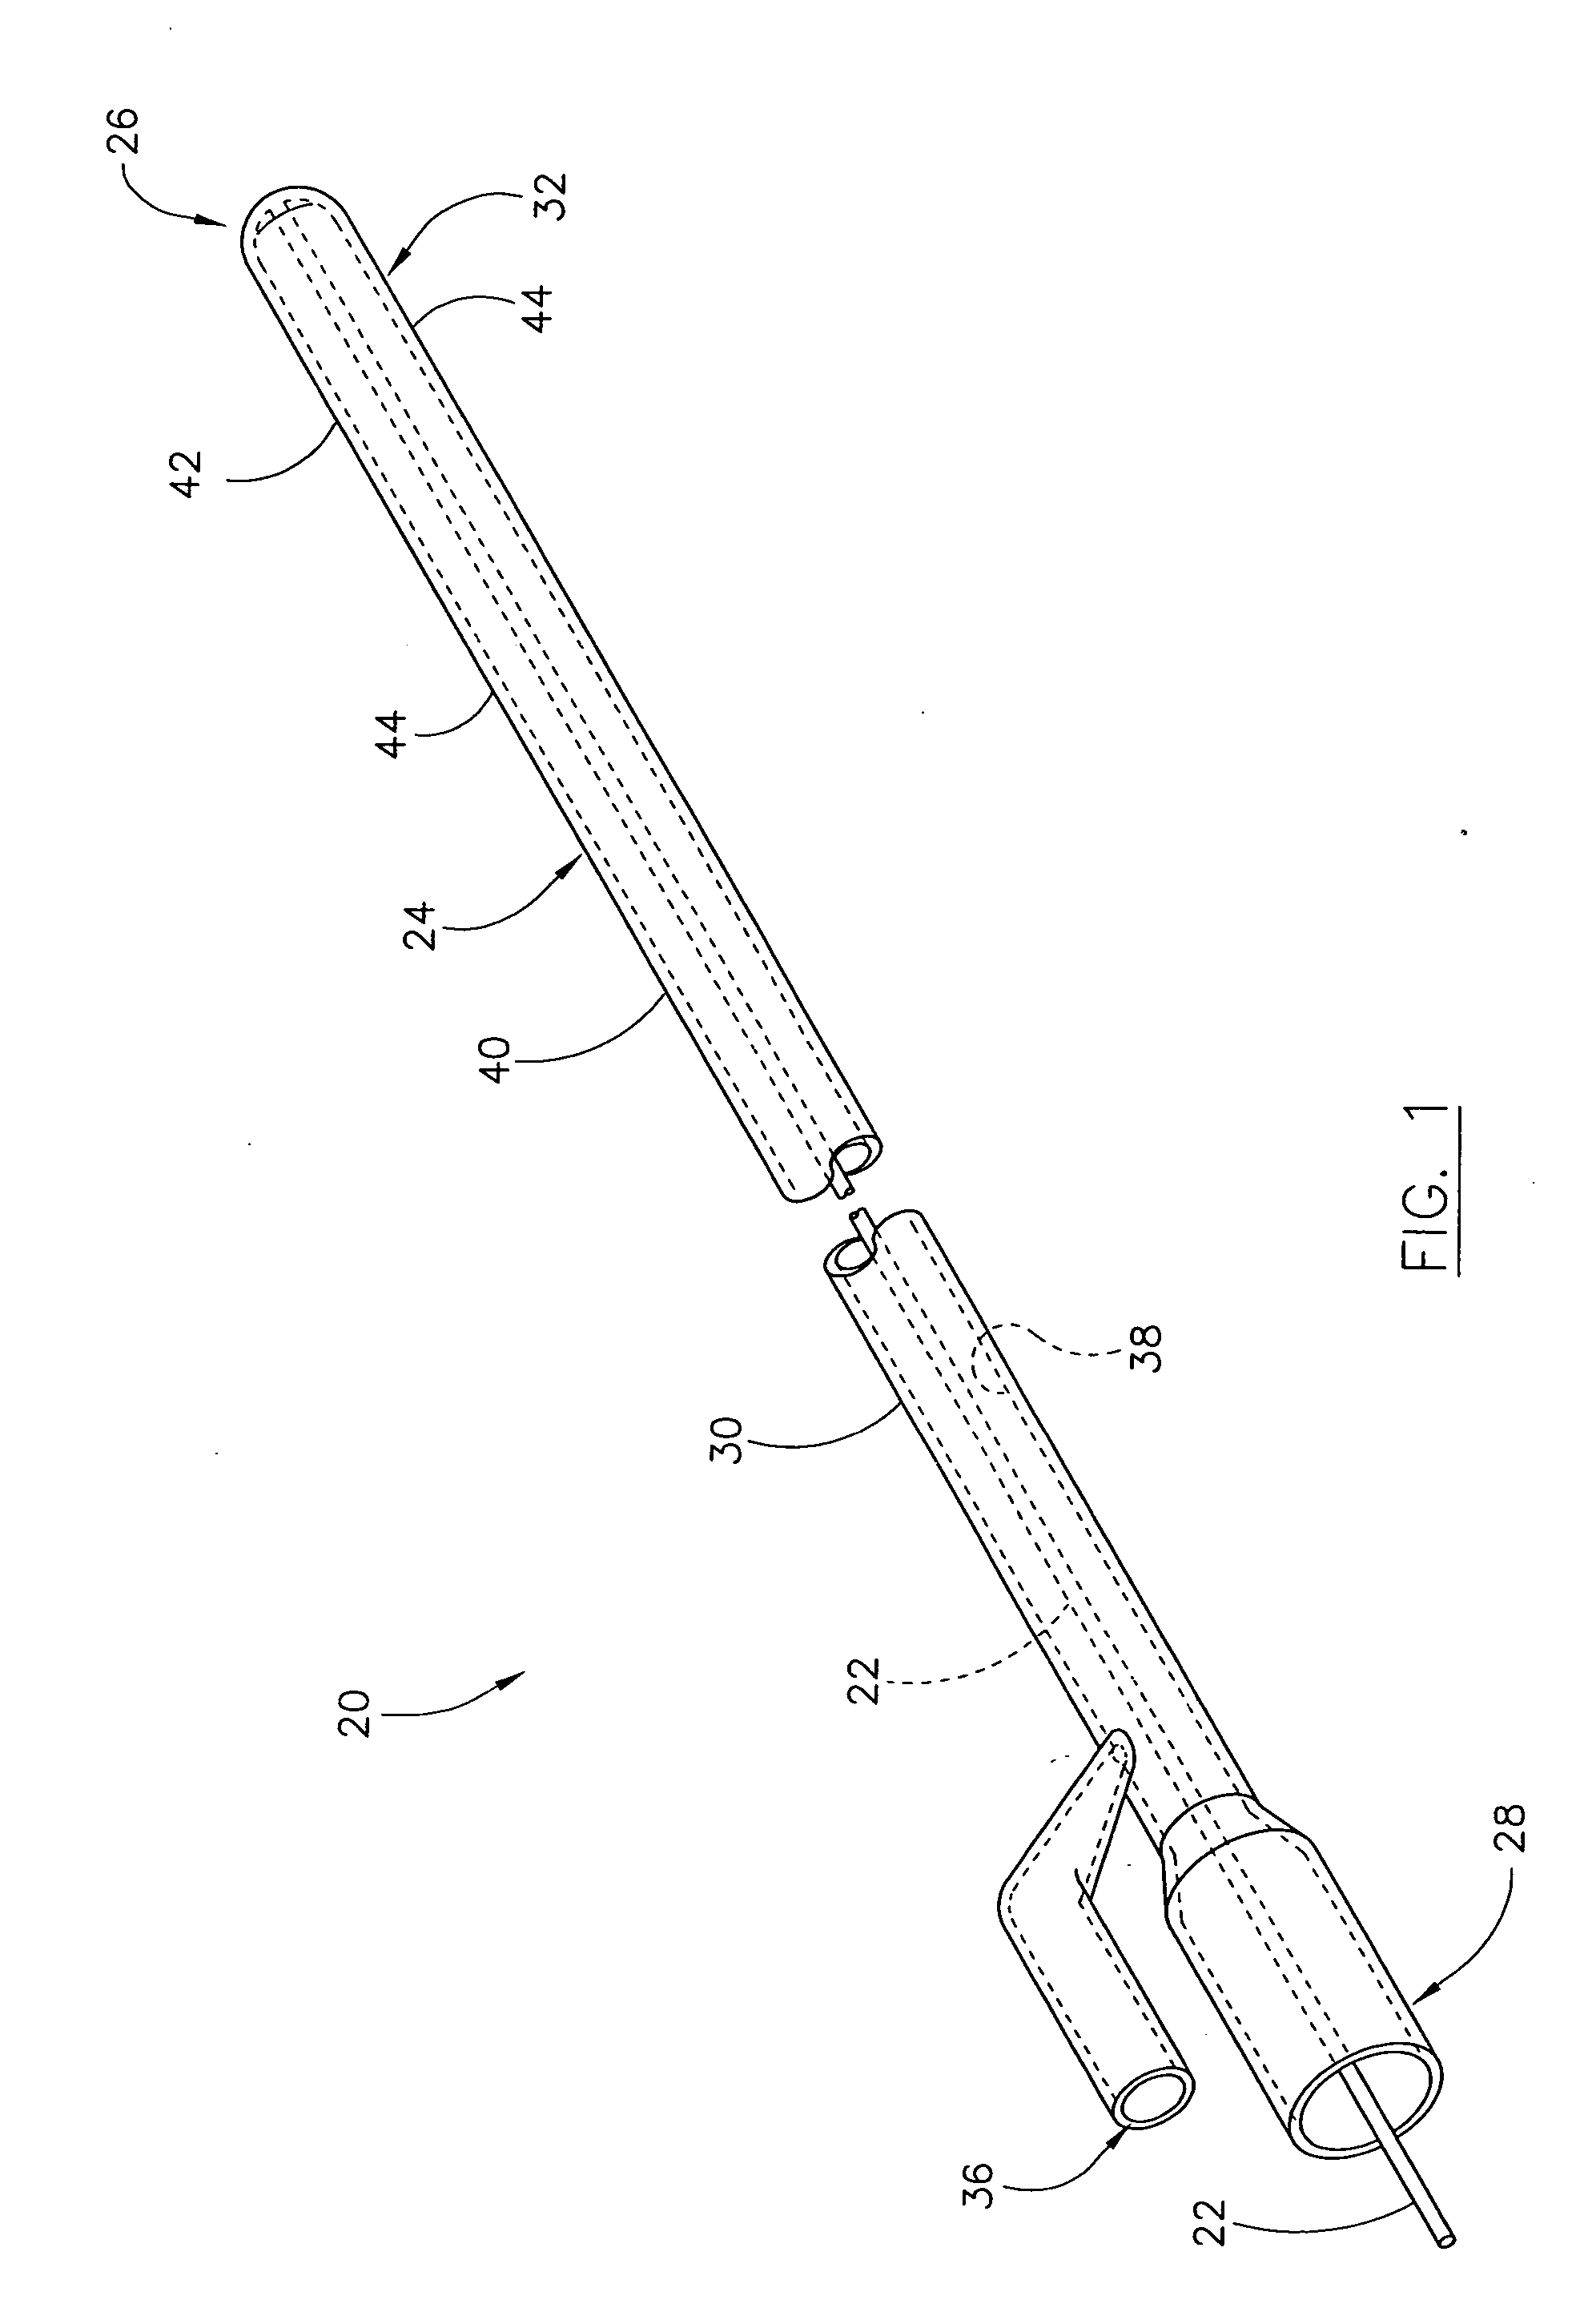 Method and apparatus for delivering targeted therapy to a patient